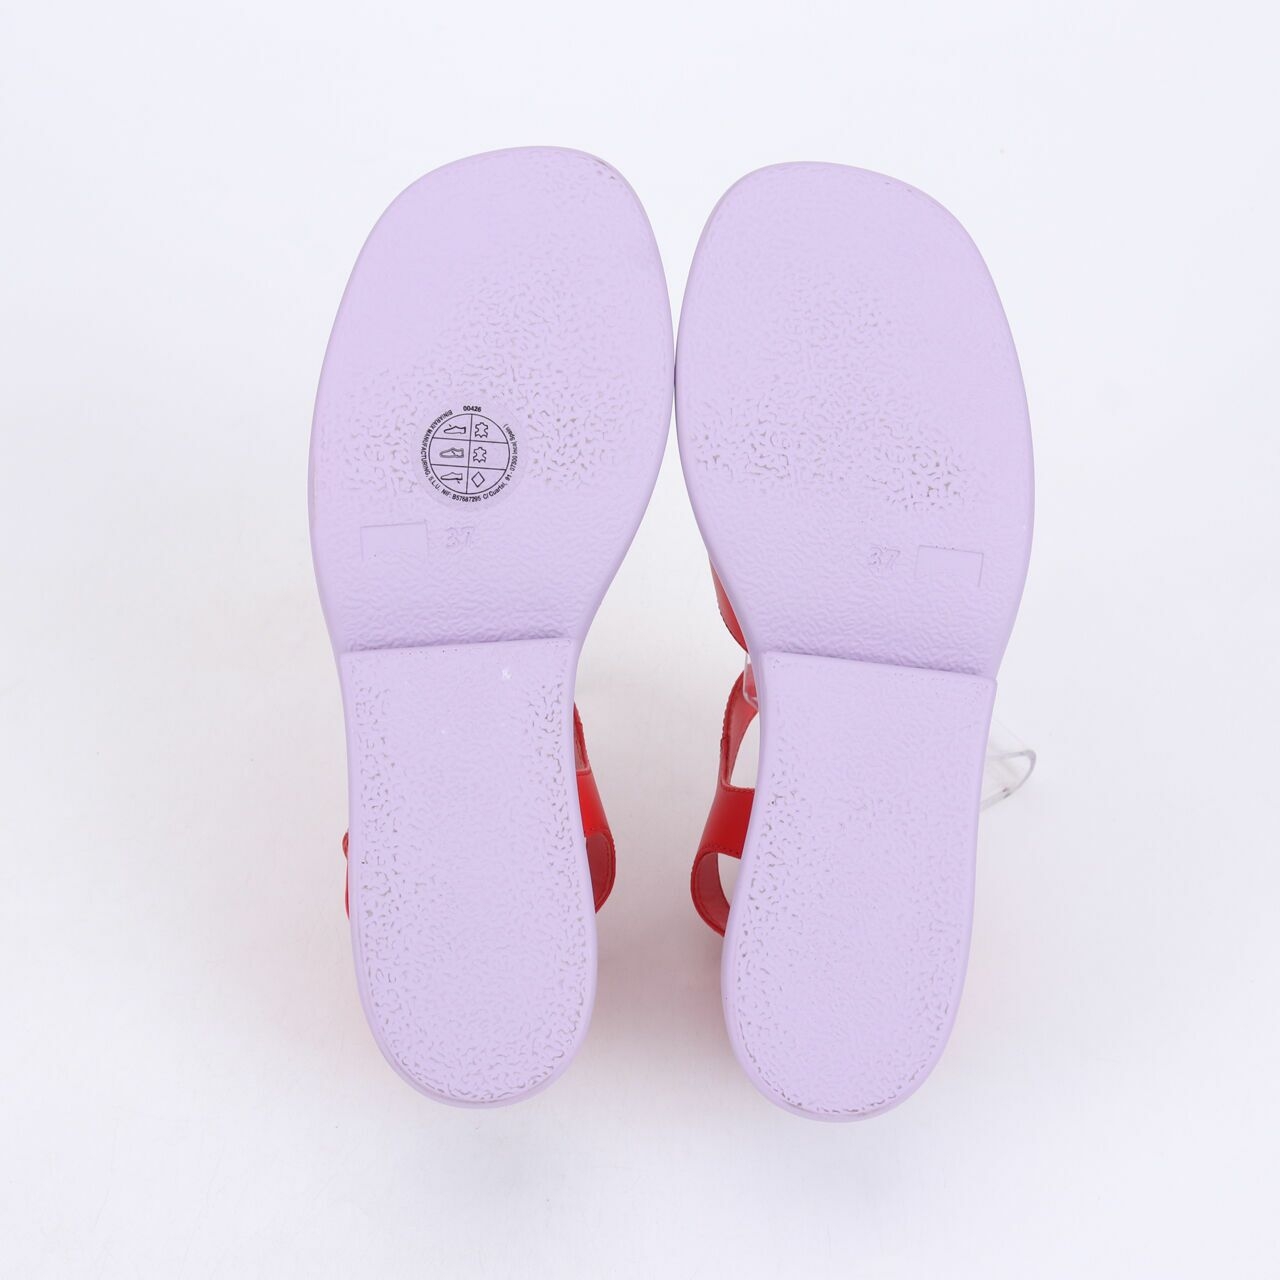 Camper Red & Lilac Wedges